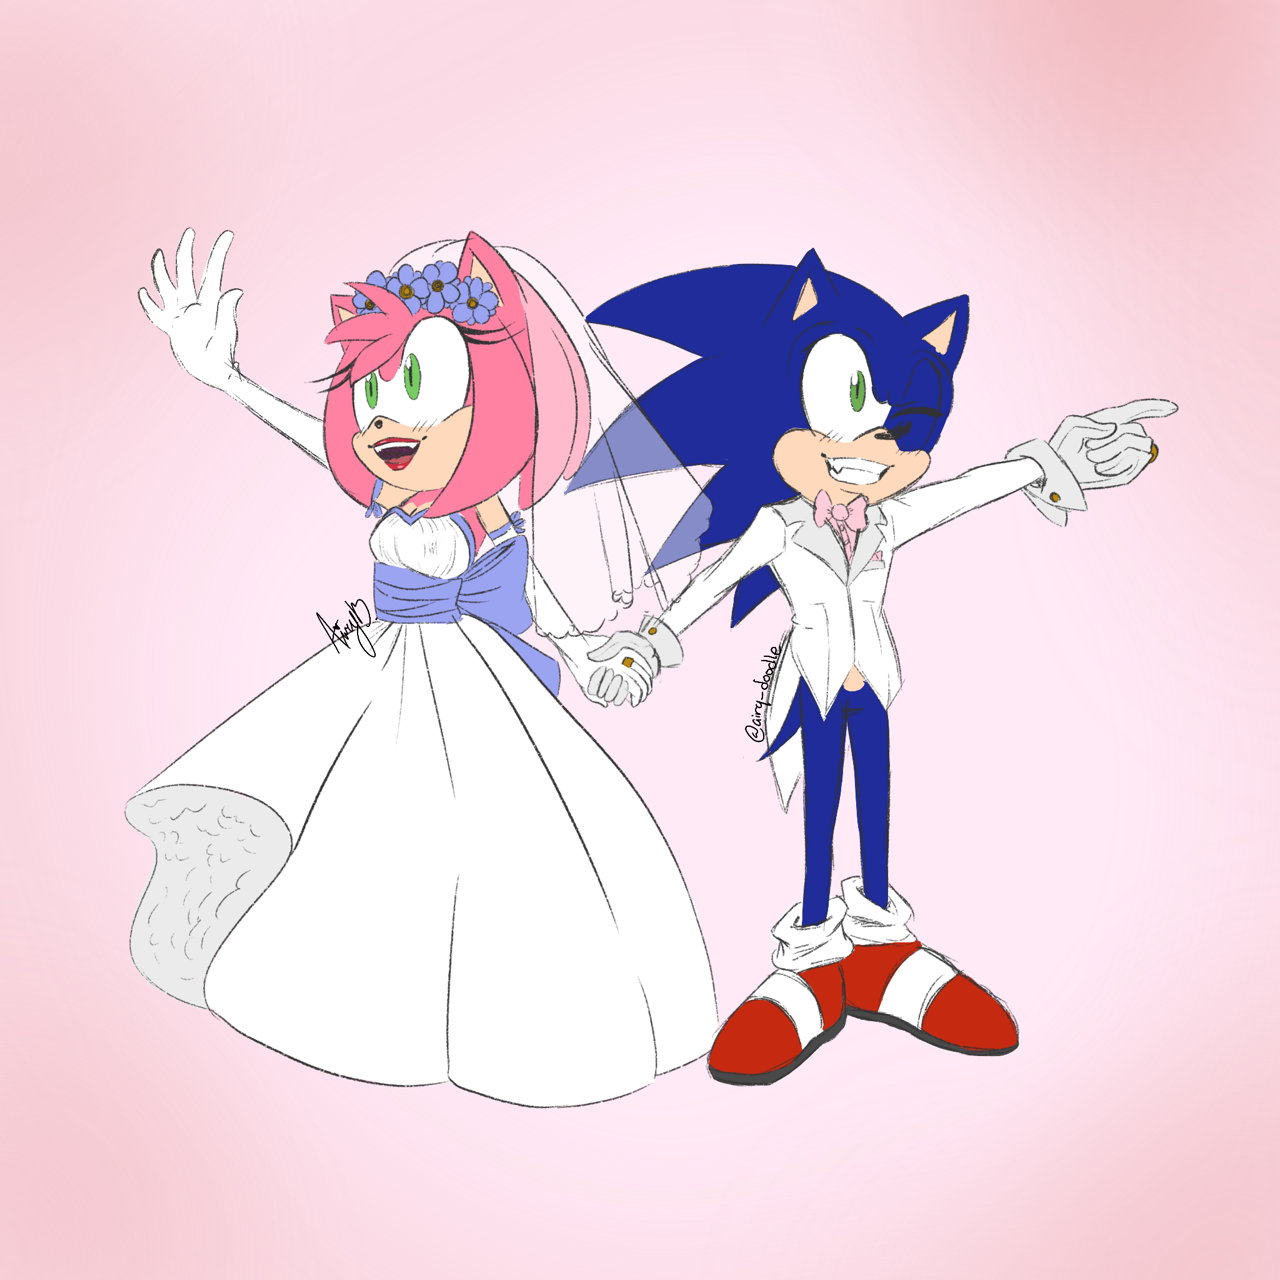 Peachy Owl on X: Have a wholesome SonAmy wedding! This one